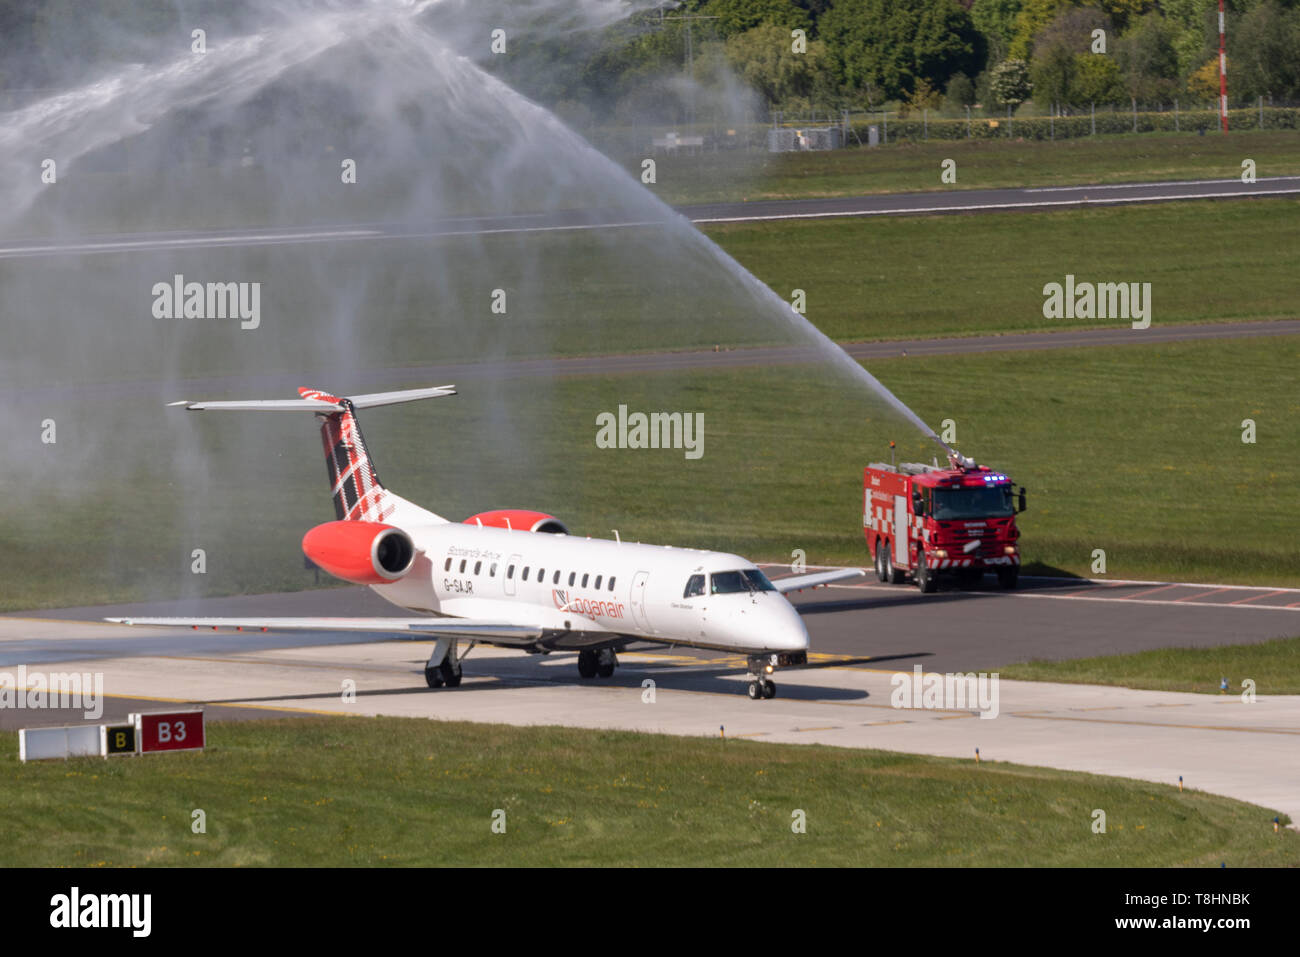 Scottish airline Loganair have become the latest airline to launch services from the expanding London Southend Airport, Essex, UK  with routes commencing to Aberdeen. The flights will be served using Embraer ERJ135 or 145 aircraft with Loganair's tartan tail scheme. A traditional water arch salute was supplied by the airport's fire trucks welcoming the afternoon's flight LM95 arrival from Aberdeen. Stock Photo